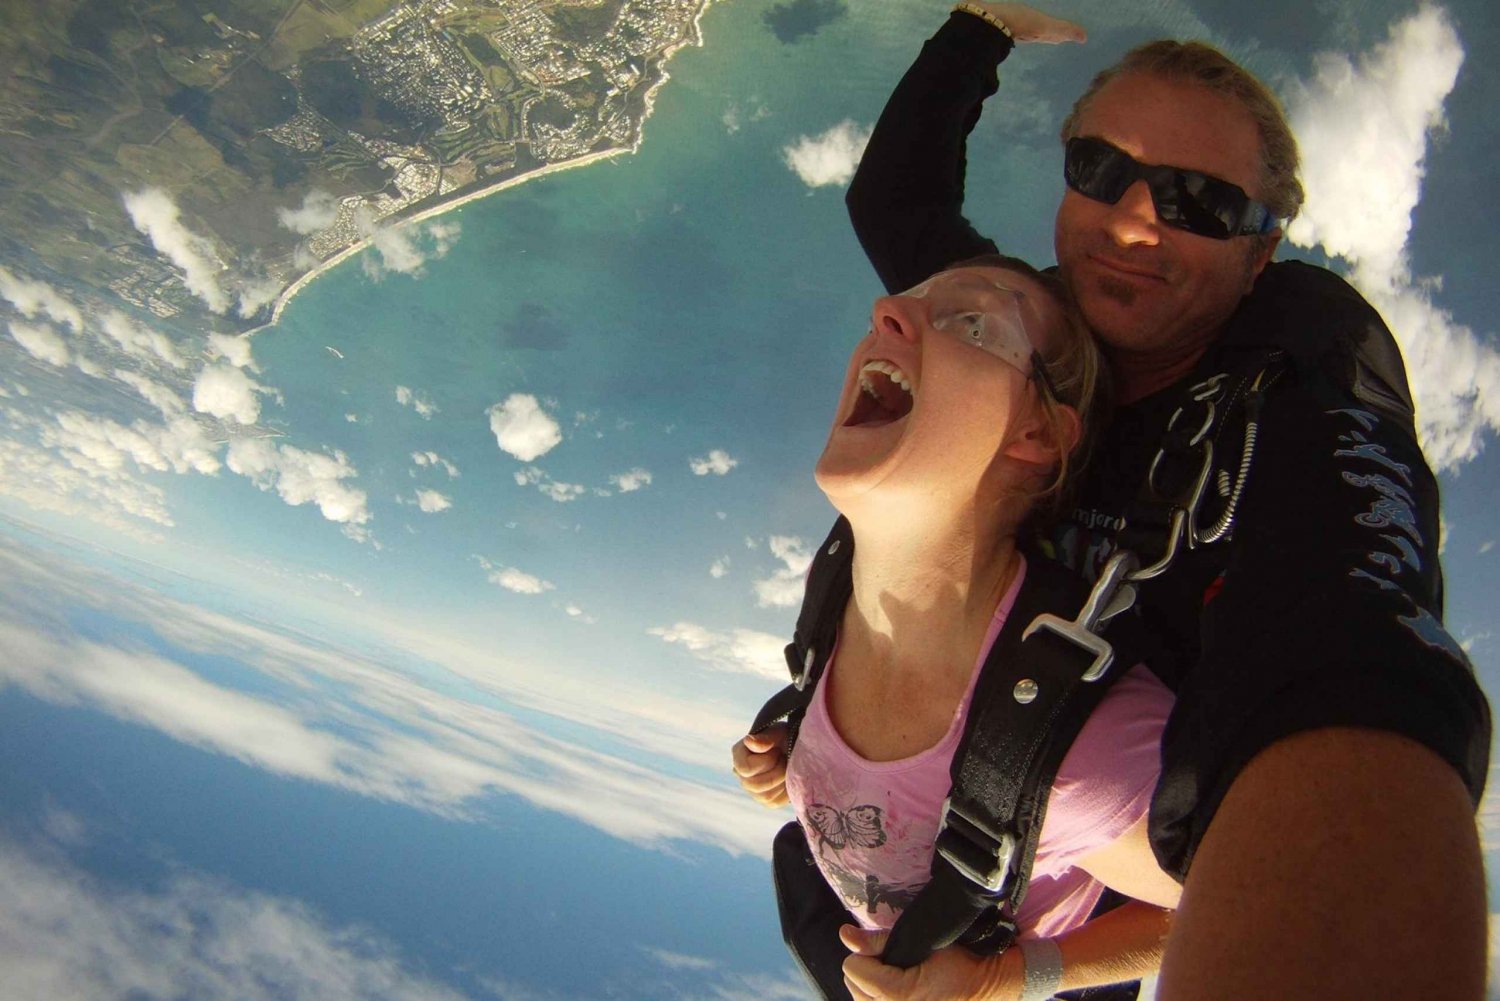 Noosa: Tandem Skydive from 15,000 Feet